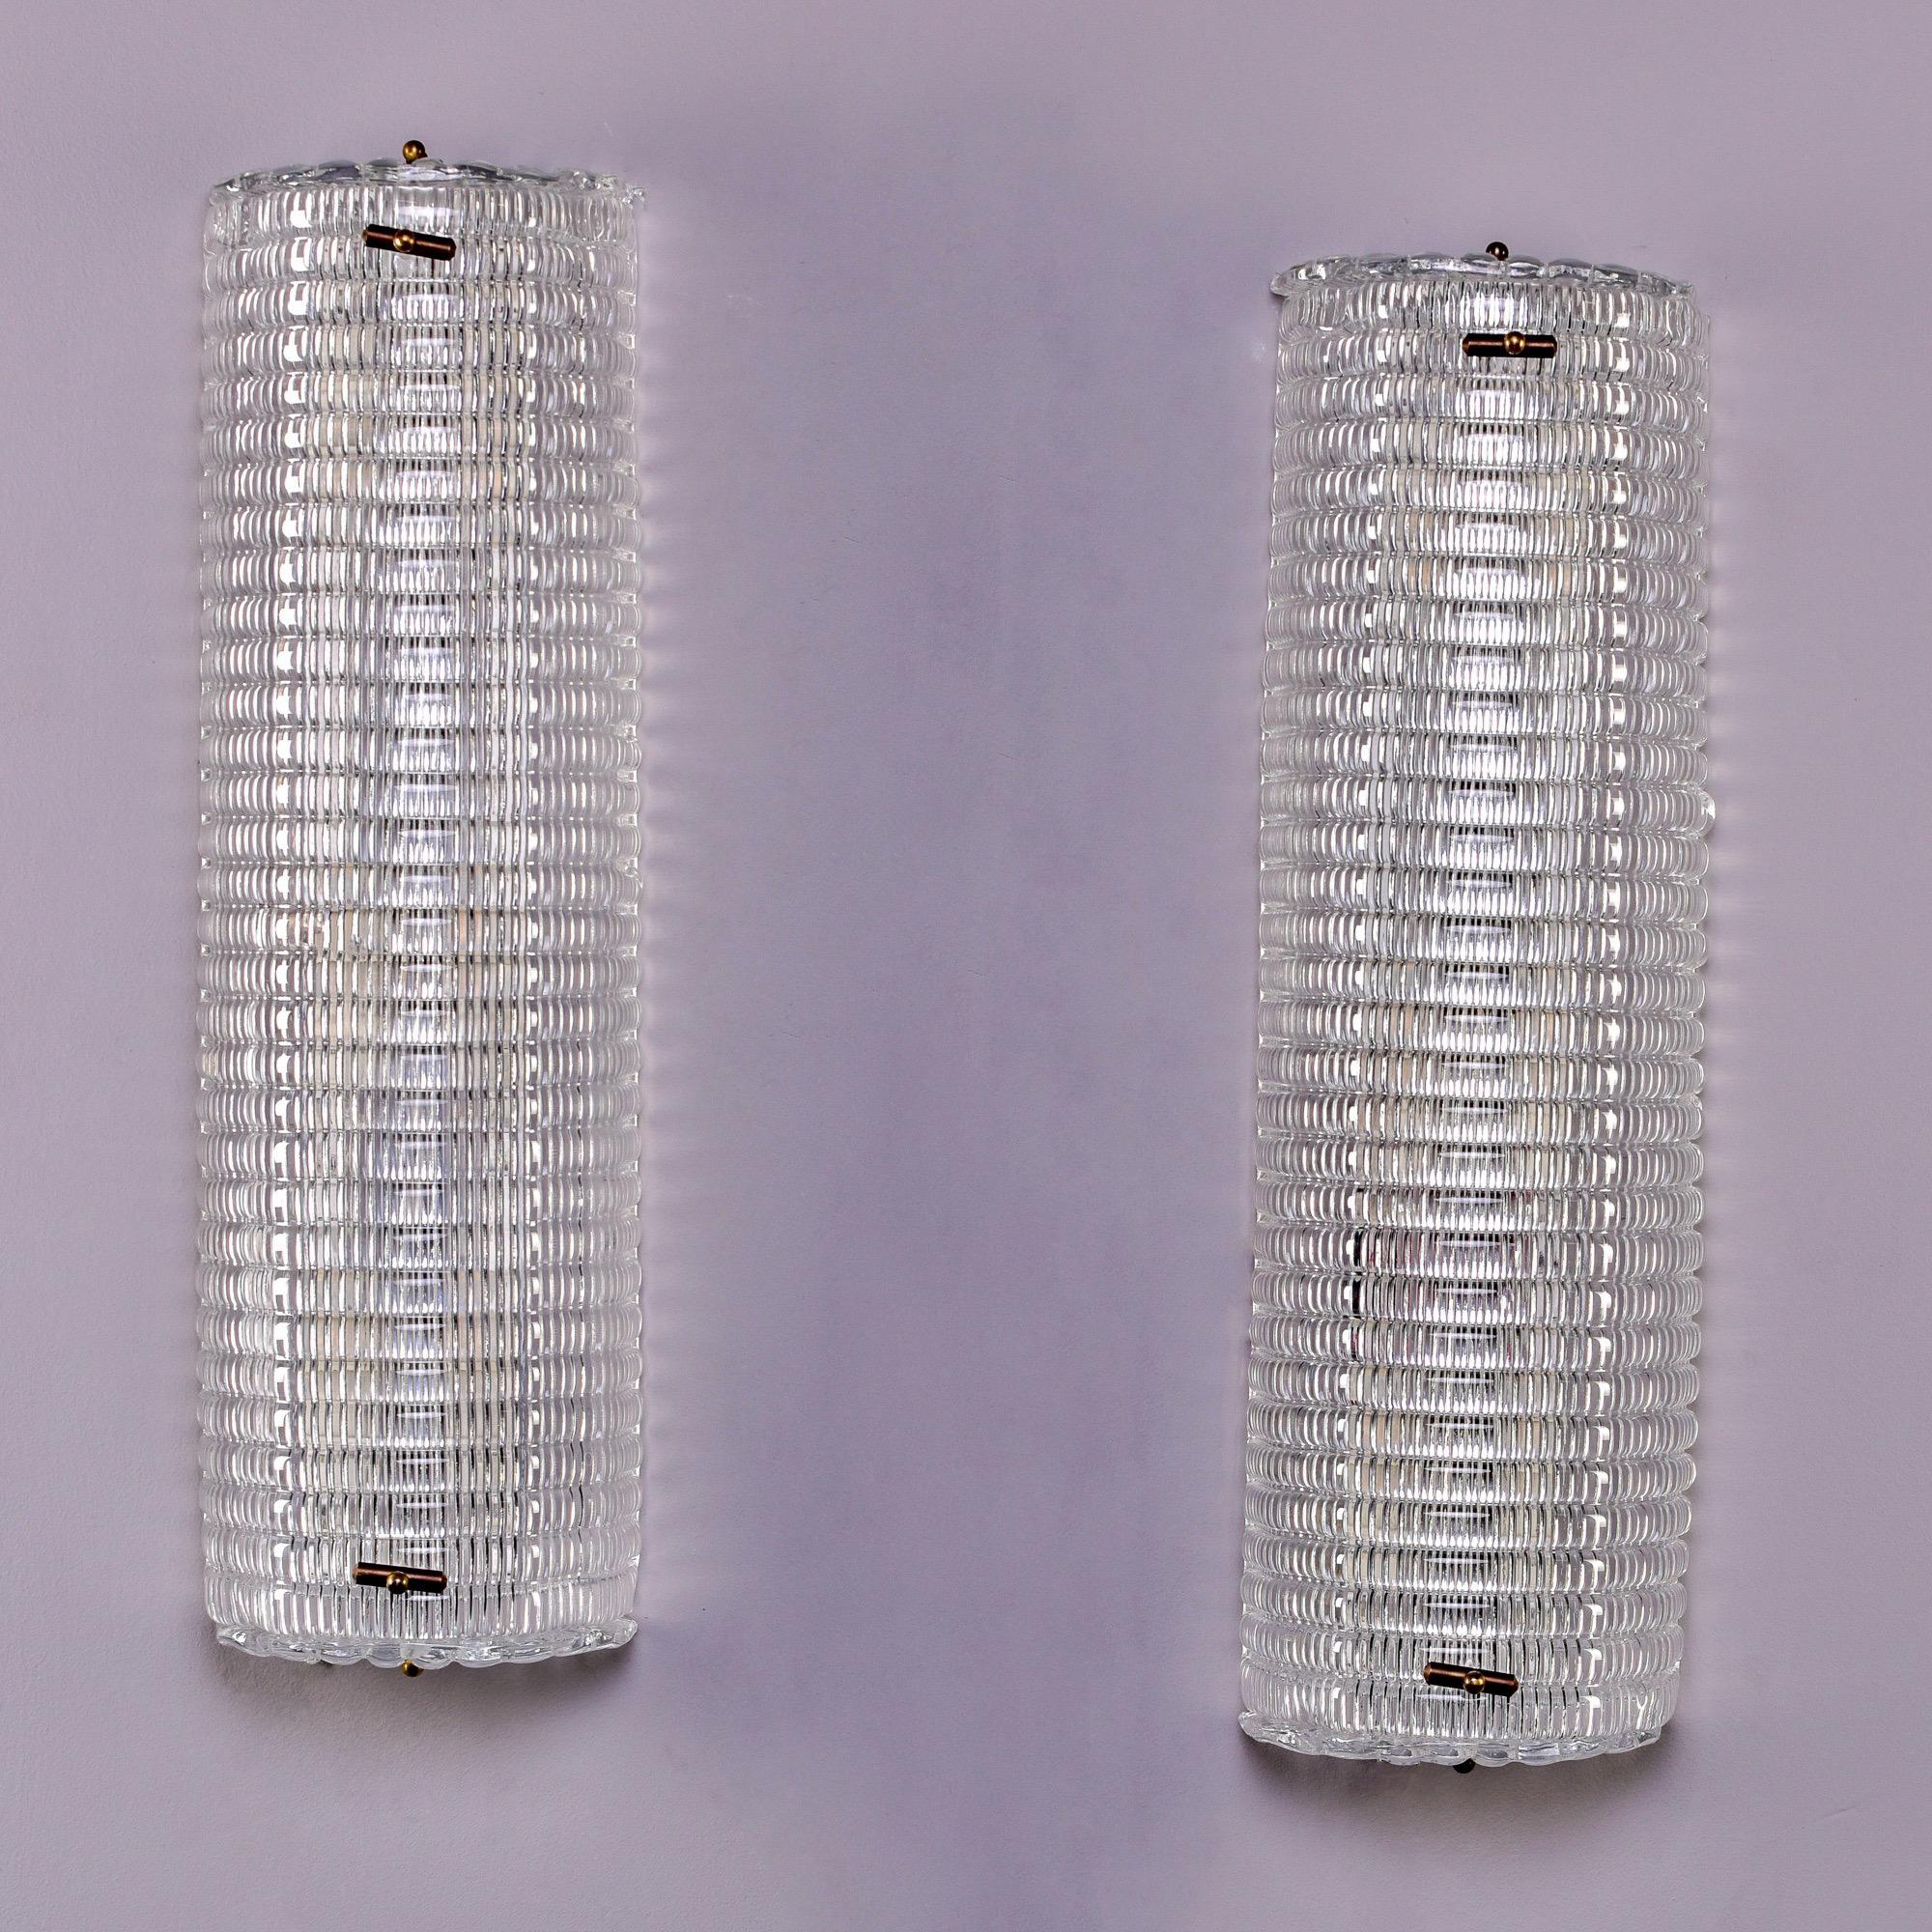 New and made in Italy of Murano glass elements, these sconces consist of thick, clear glass that has a ribbed texture on the inside surface. Each sconce is just over two feet tall (or wide - depending on how they are oriented on the wall) and has